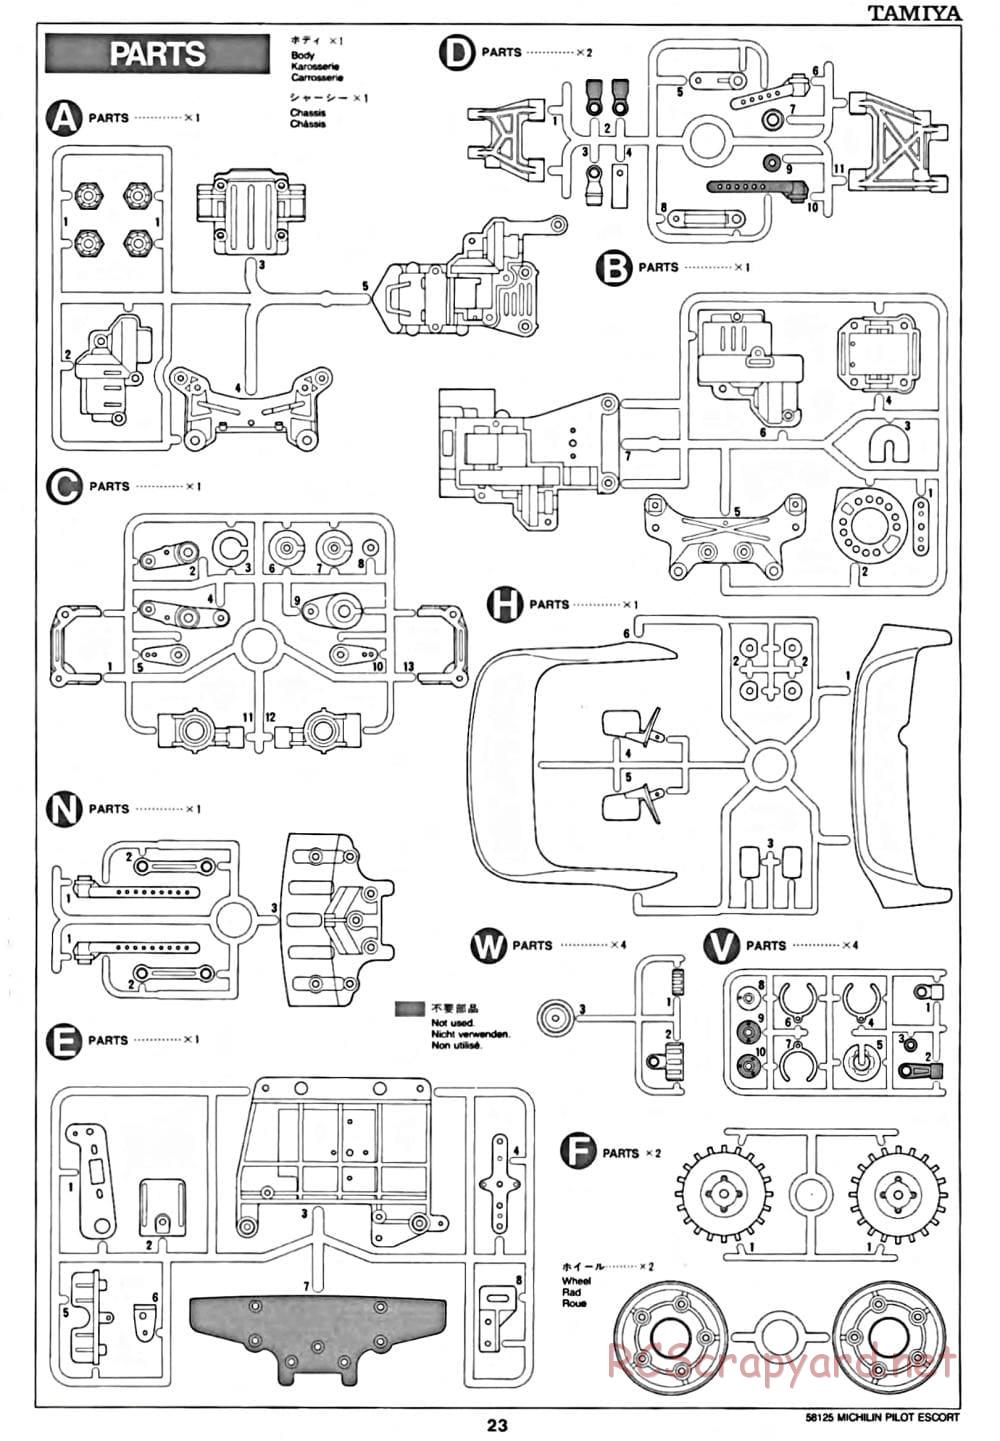 Tamiya - Michelin Pilot Ford Escort RS Cosworth - TA-01 Chassis - Manual - Page 24